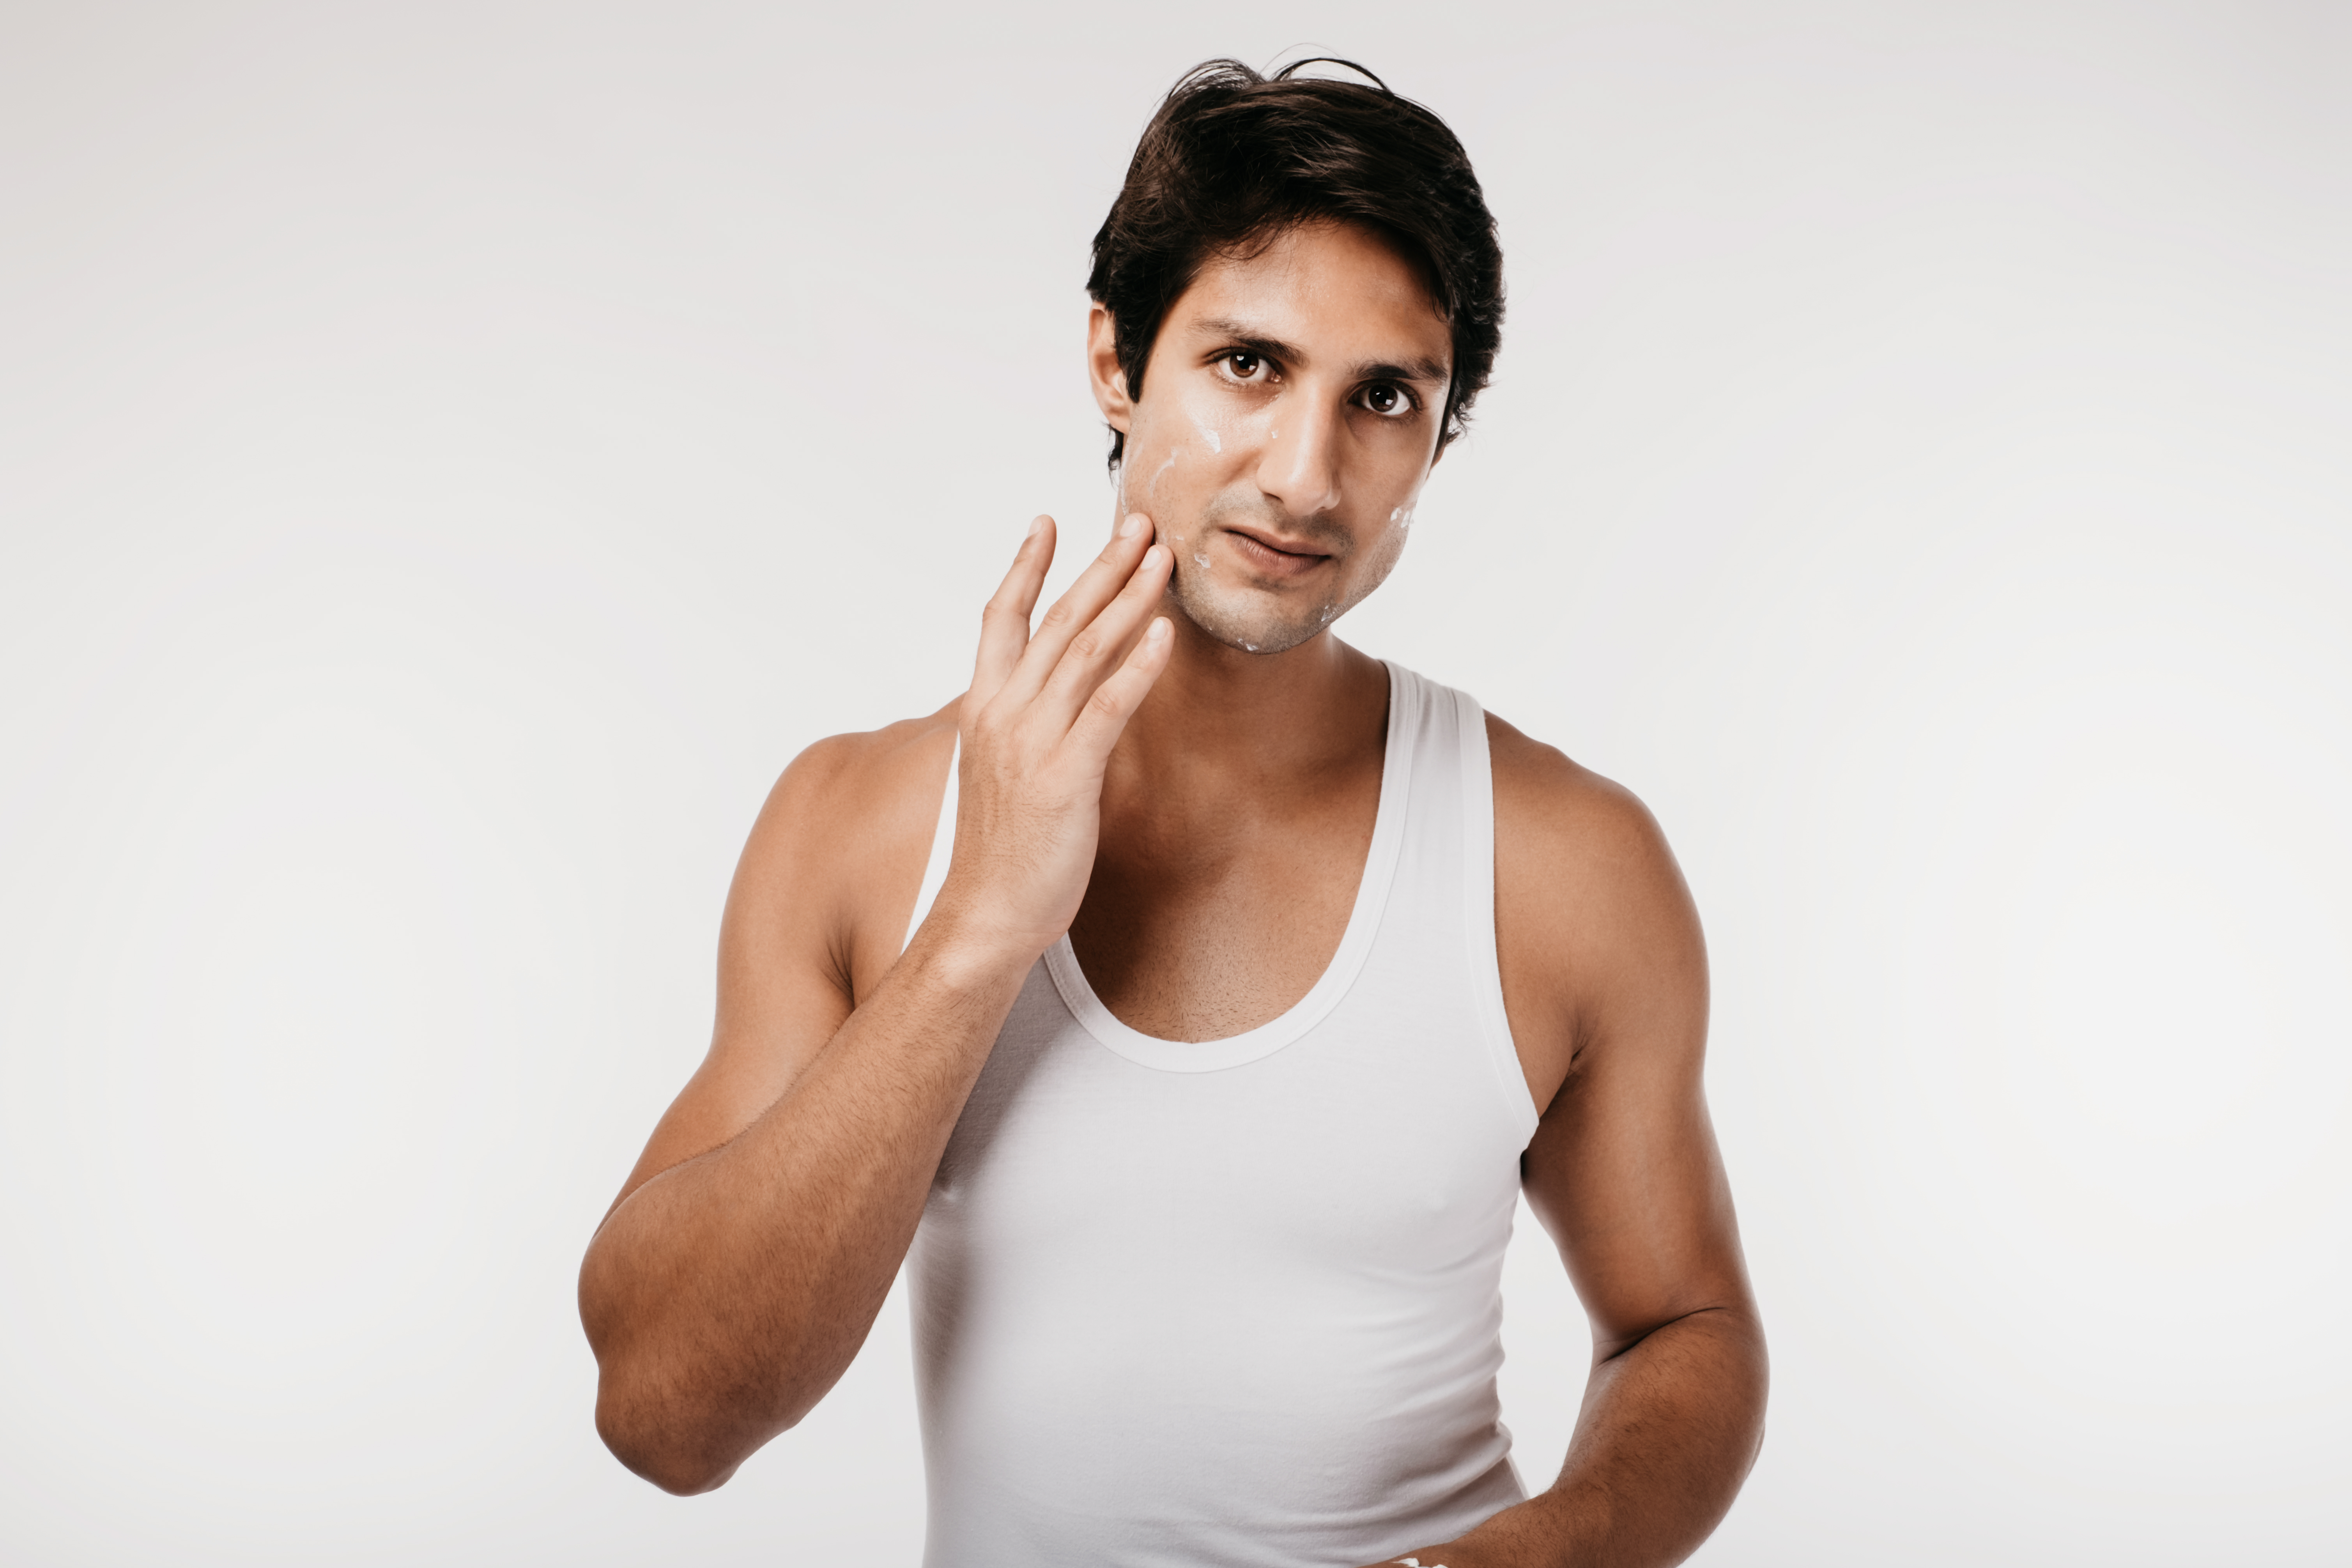 Man with sunscreen on his face | Source: Shutterstock